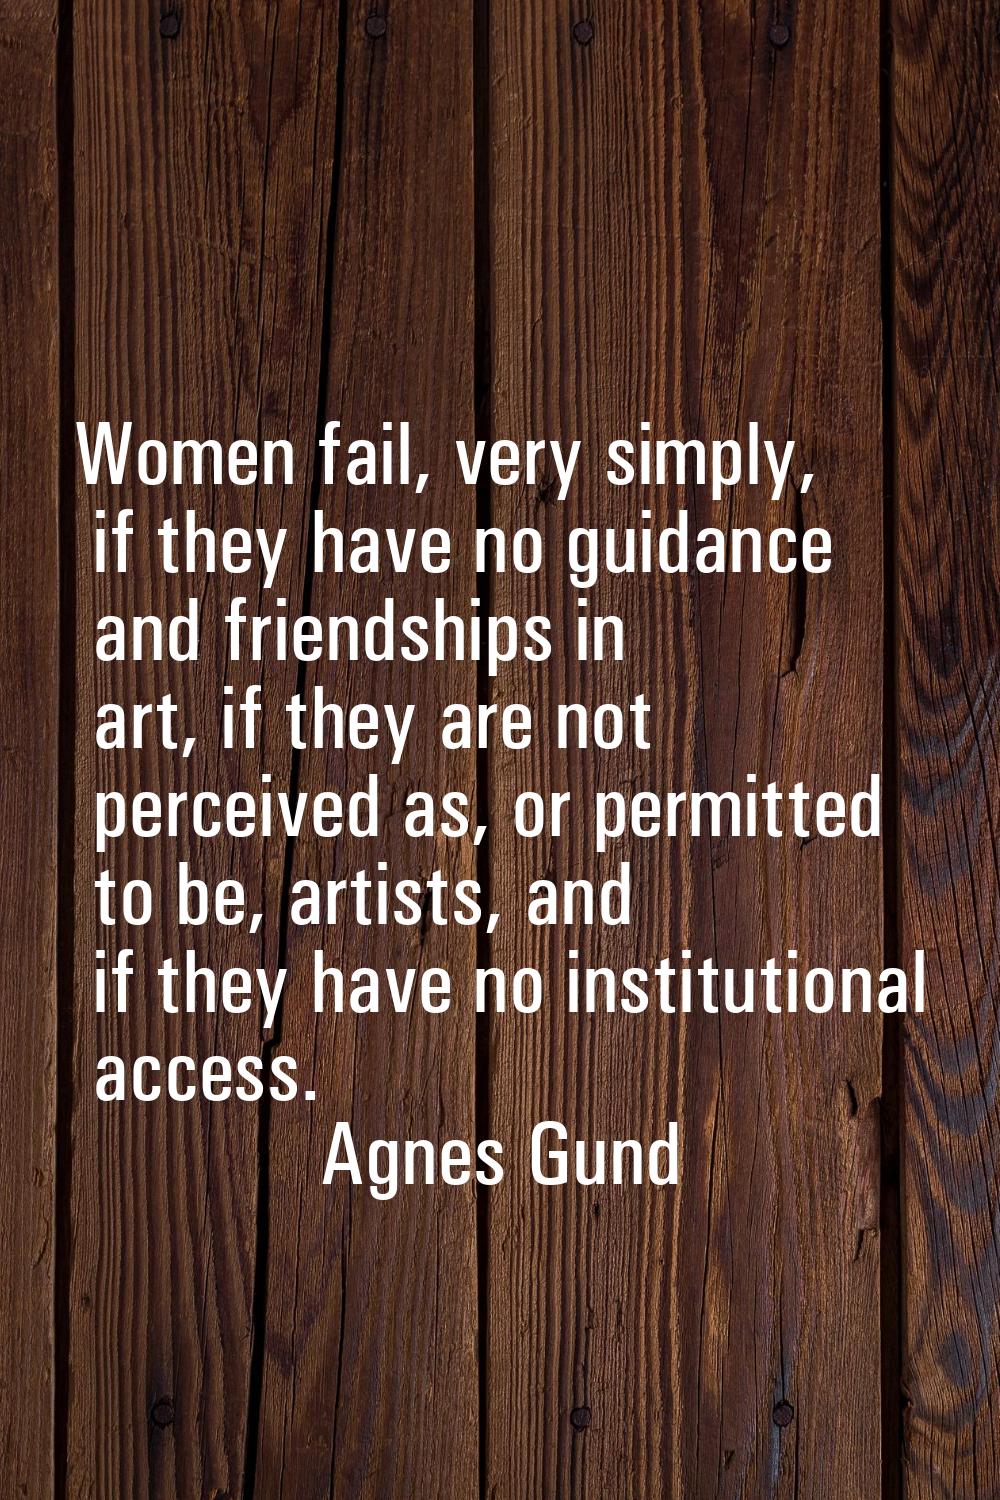 Women fail, very simply, if they have no guidance and friendships in art, if they are not perceived